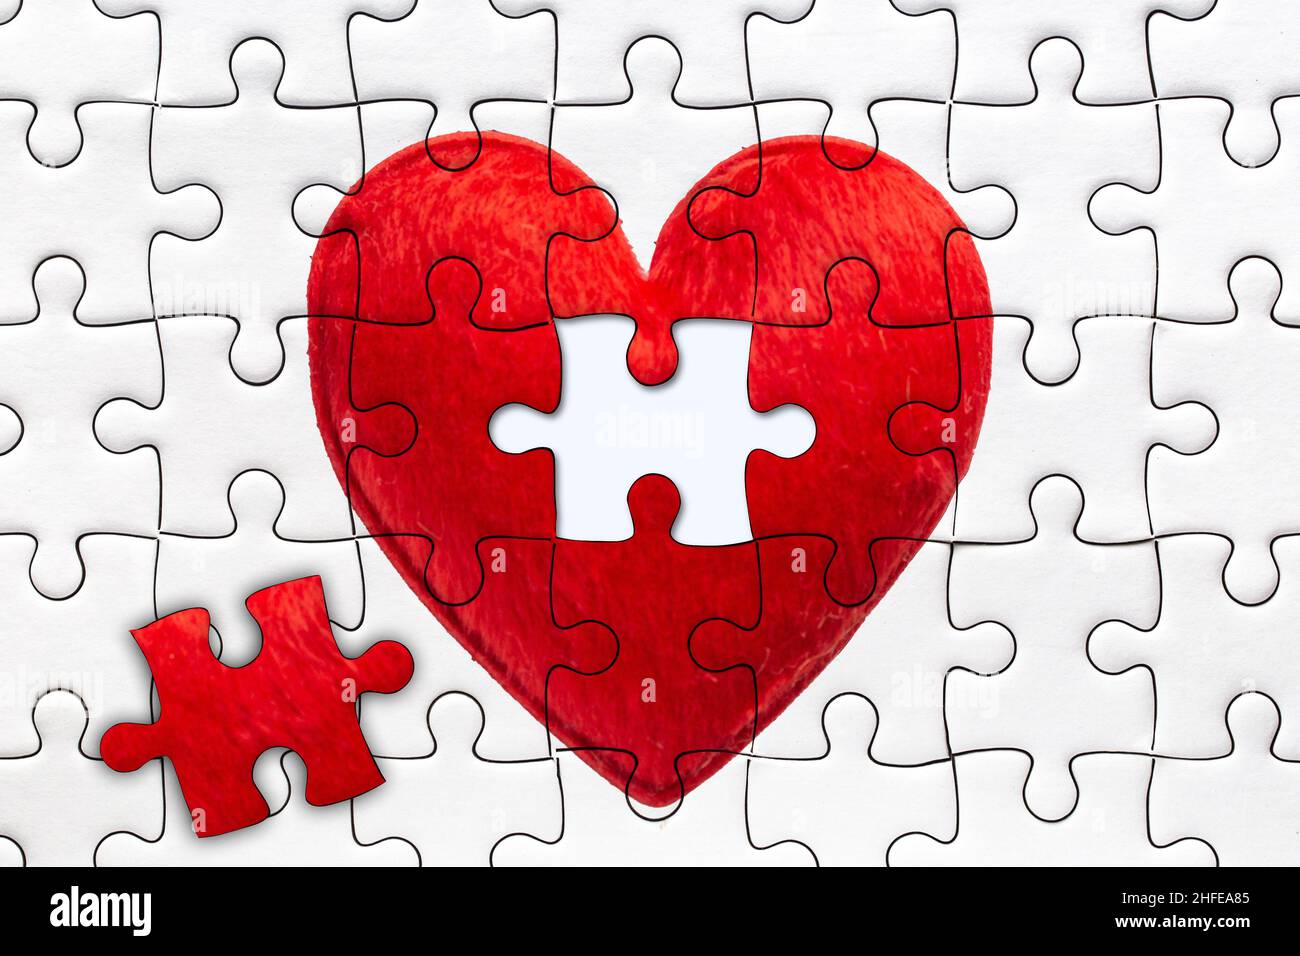 last piece to complete heart jigsaw puzzles for full fill love together concept Stock Photo